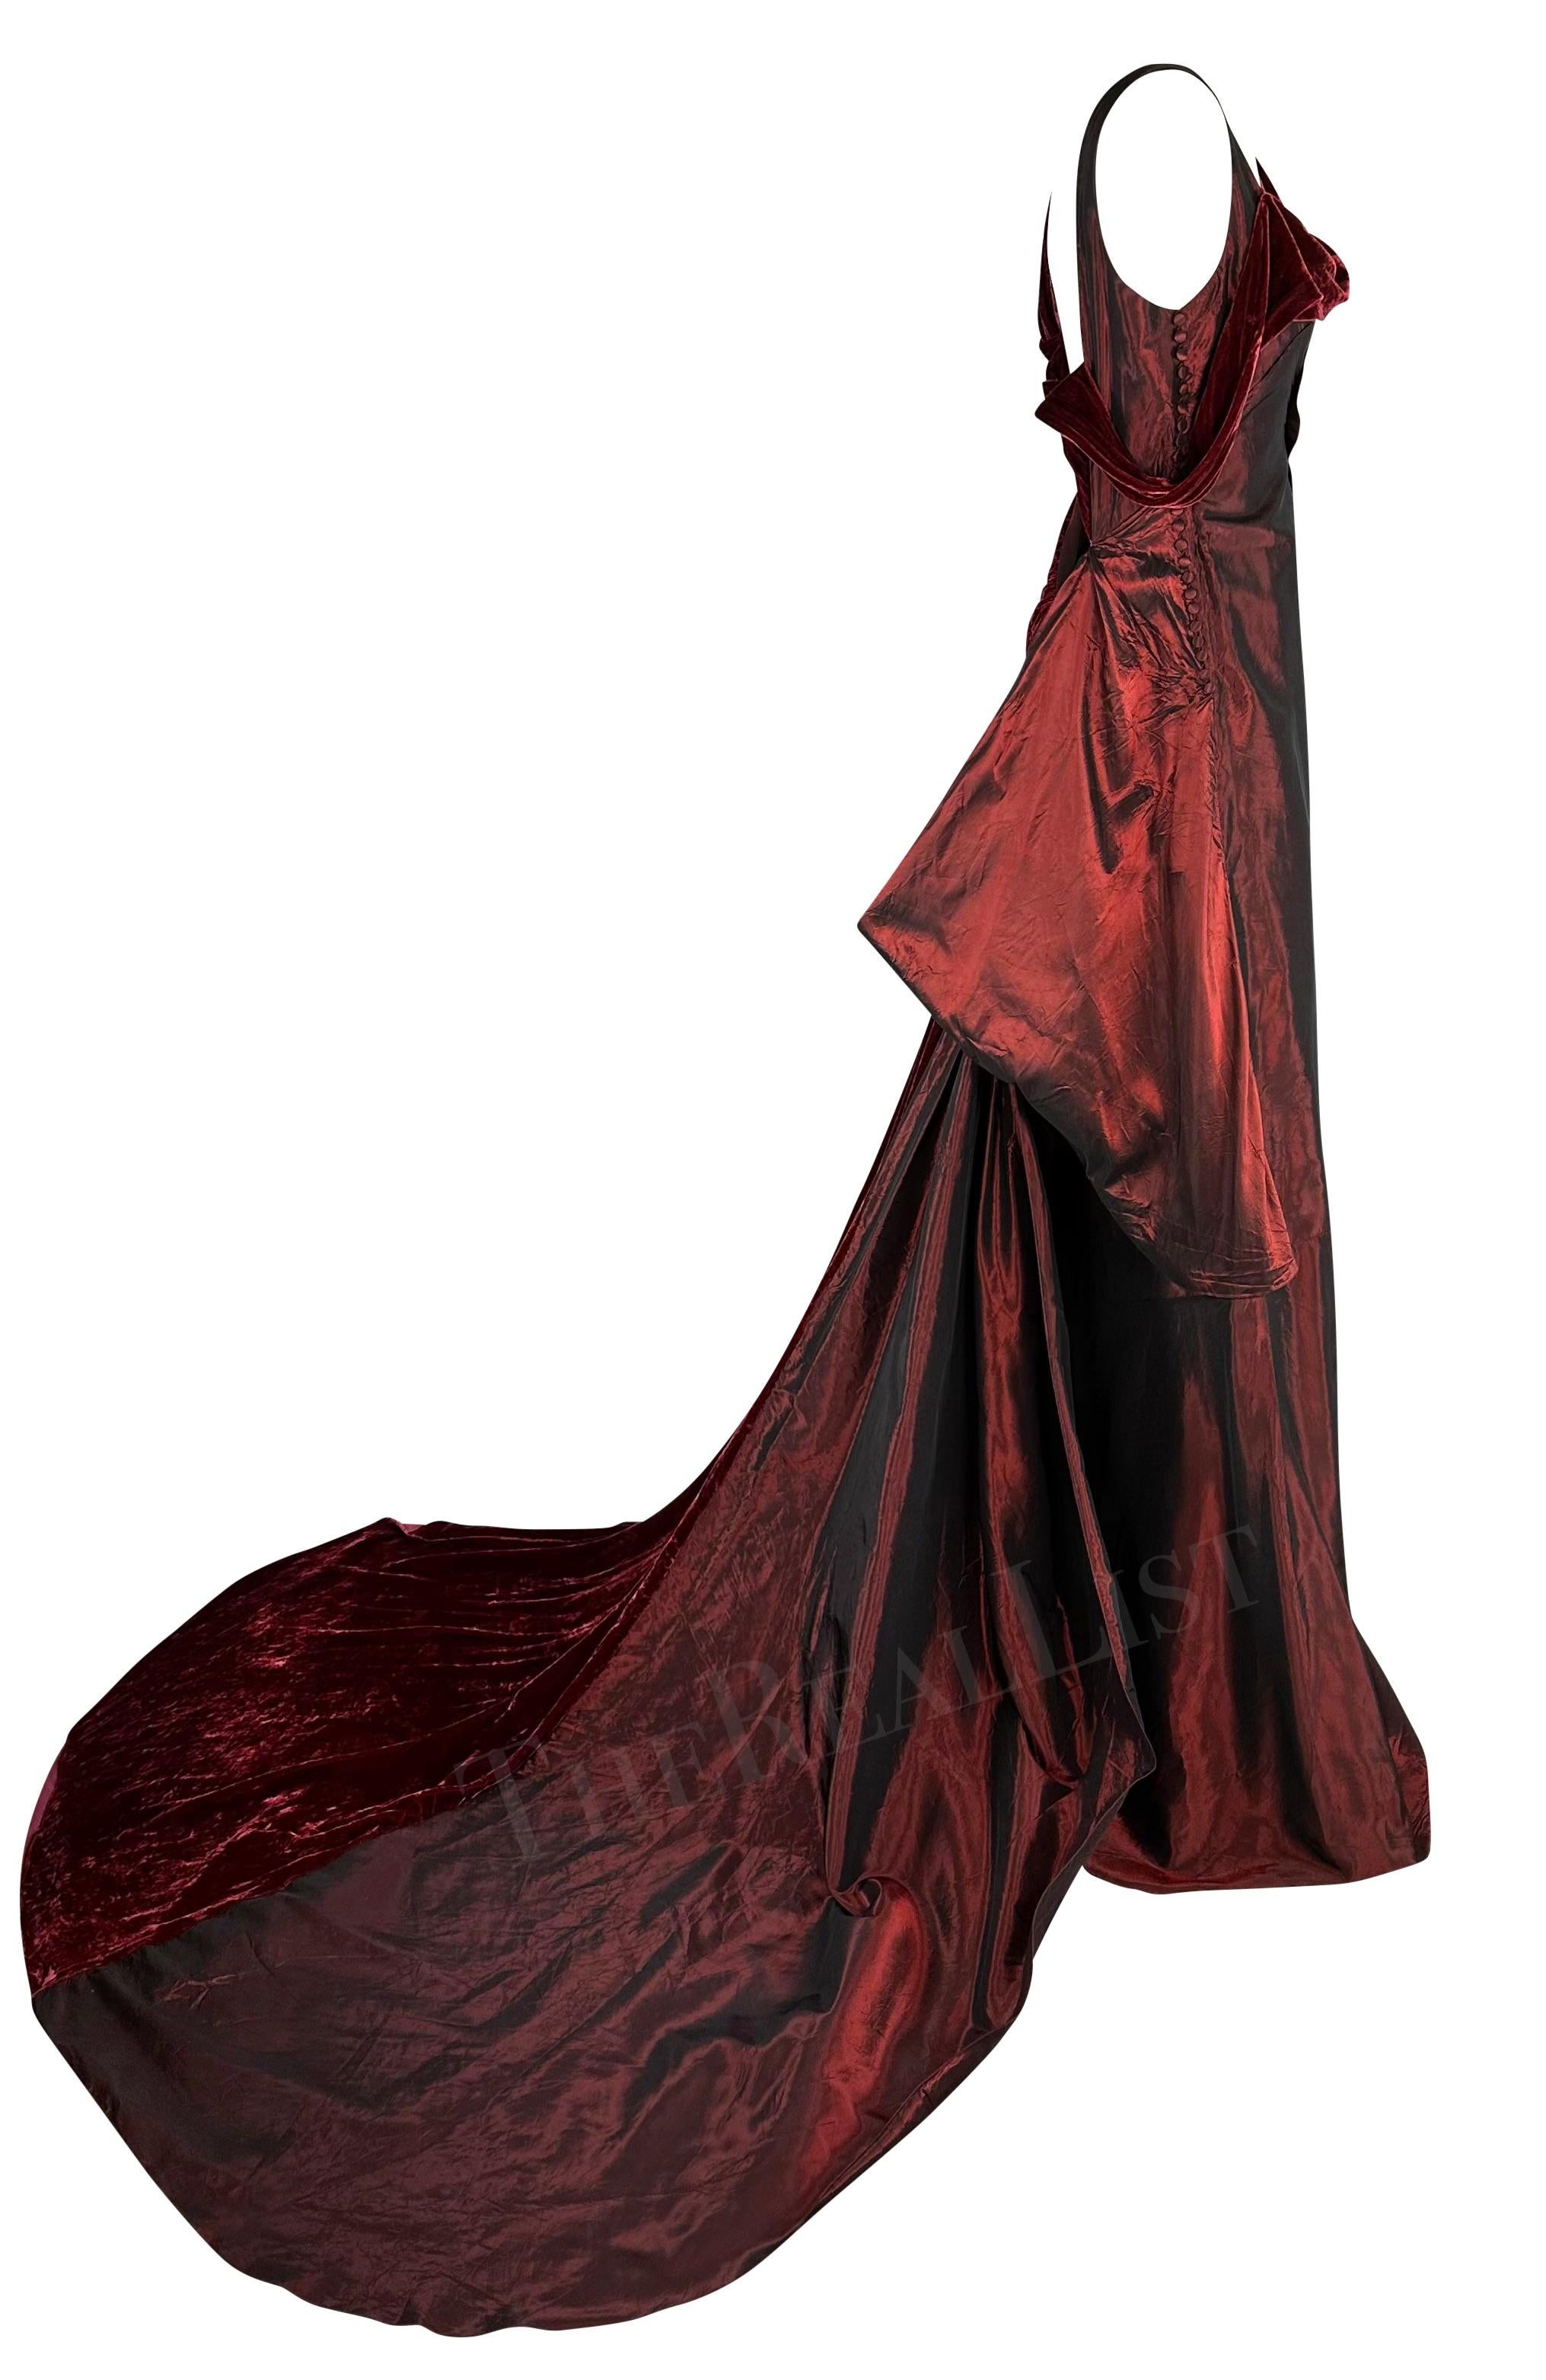 F/W 2006 John Galliano Burgundy Velvet Iridescent Satin Asymmetric Gown Train In Excellent Condition For Sale In West Hollywood, CA